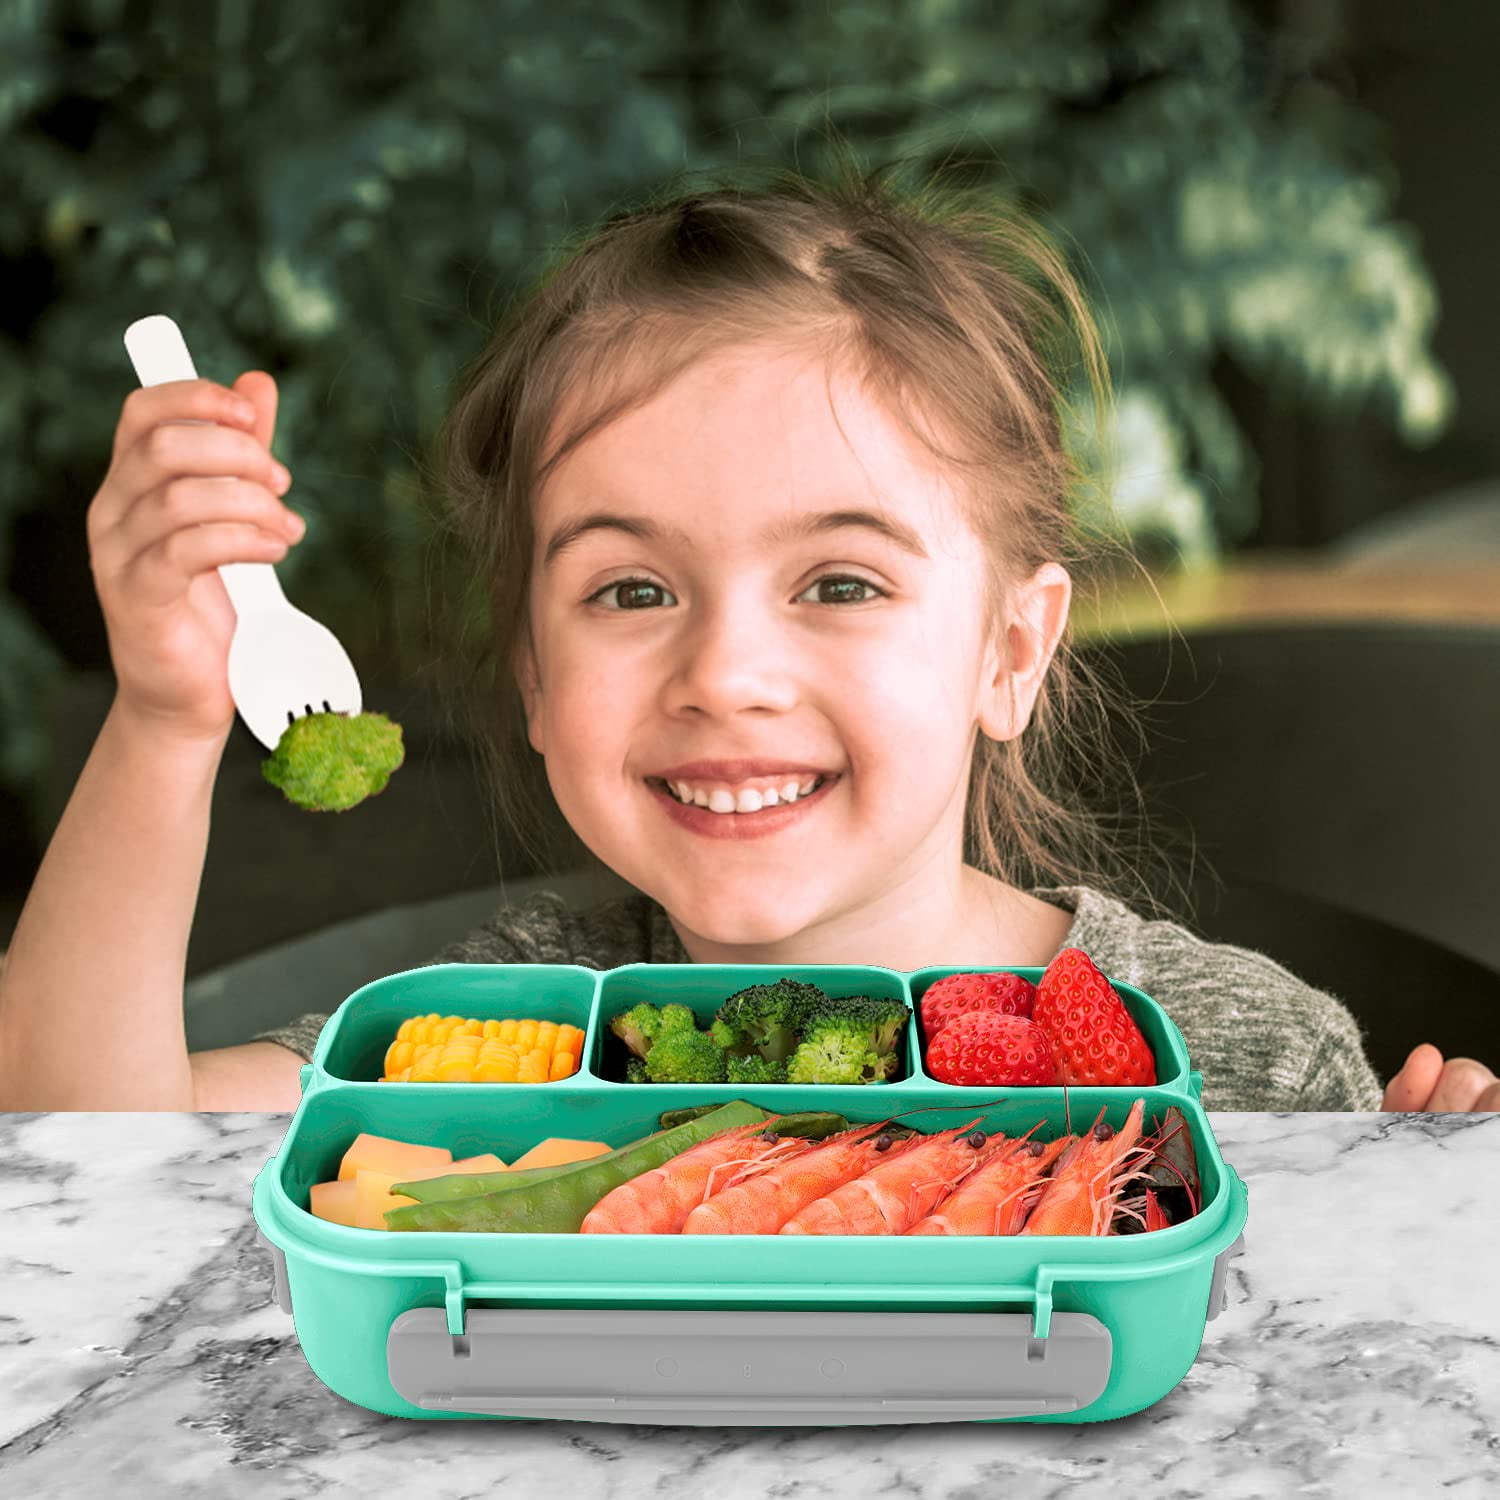 Cteegc Clearance Lunch Box Kids,Bento Box Adult Lunch Box,Lunch Containers for Adults/Kids/Toddler,1100ML-2 Compartment Bento Lunch Box,Built-In